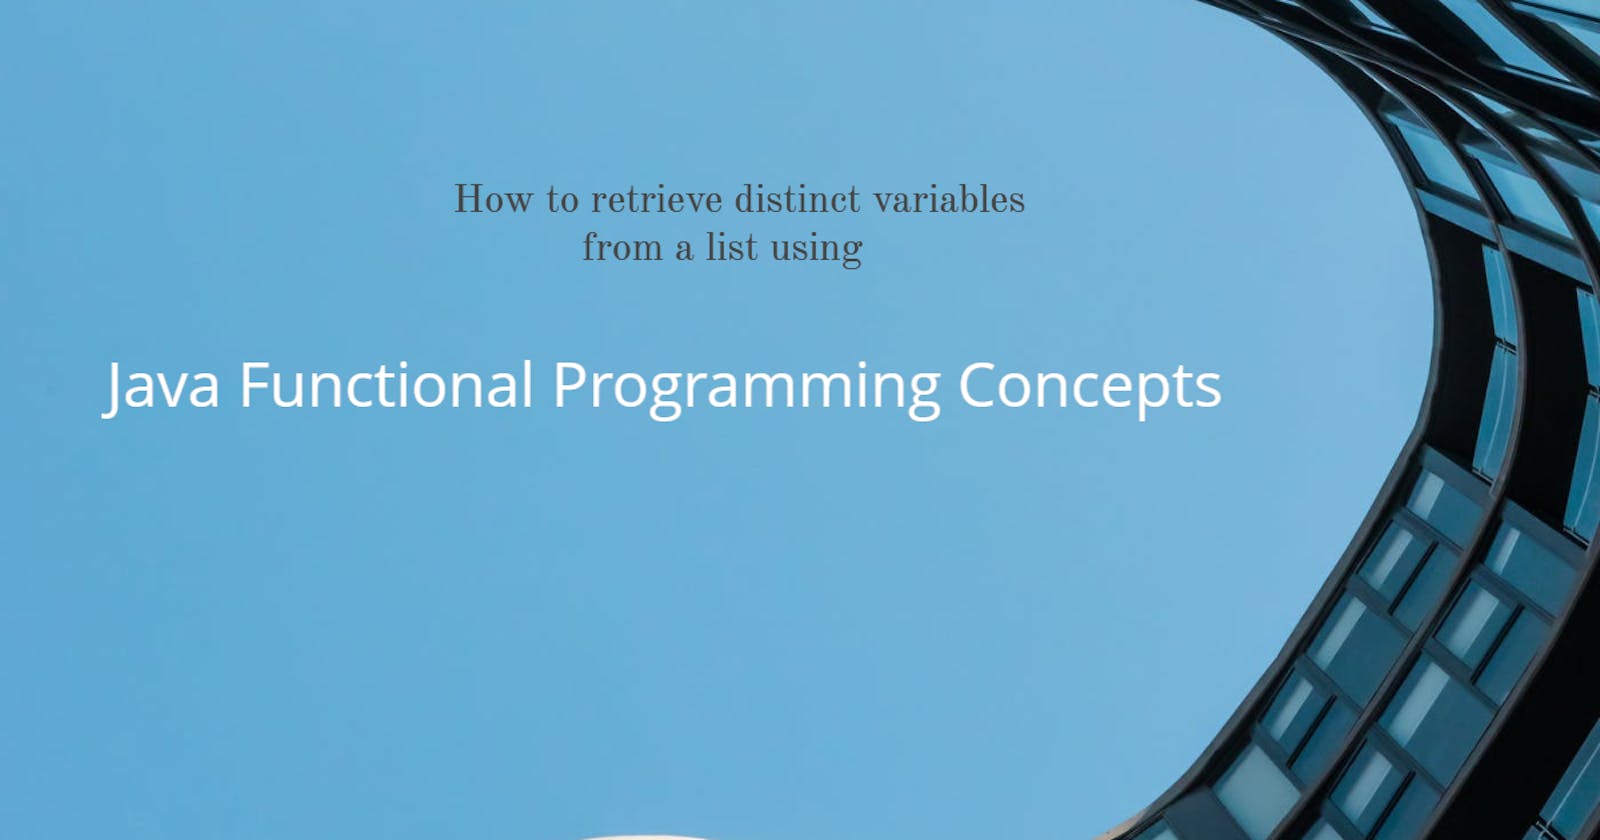 How to retrieve distinct variables from a list using Java functional programming concepts